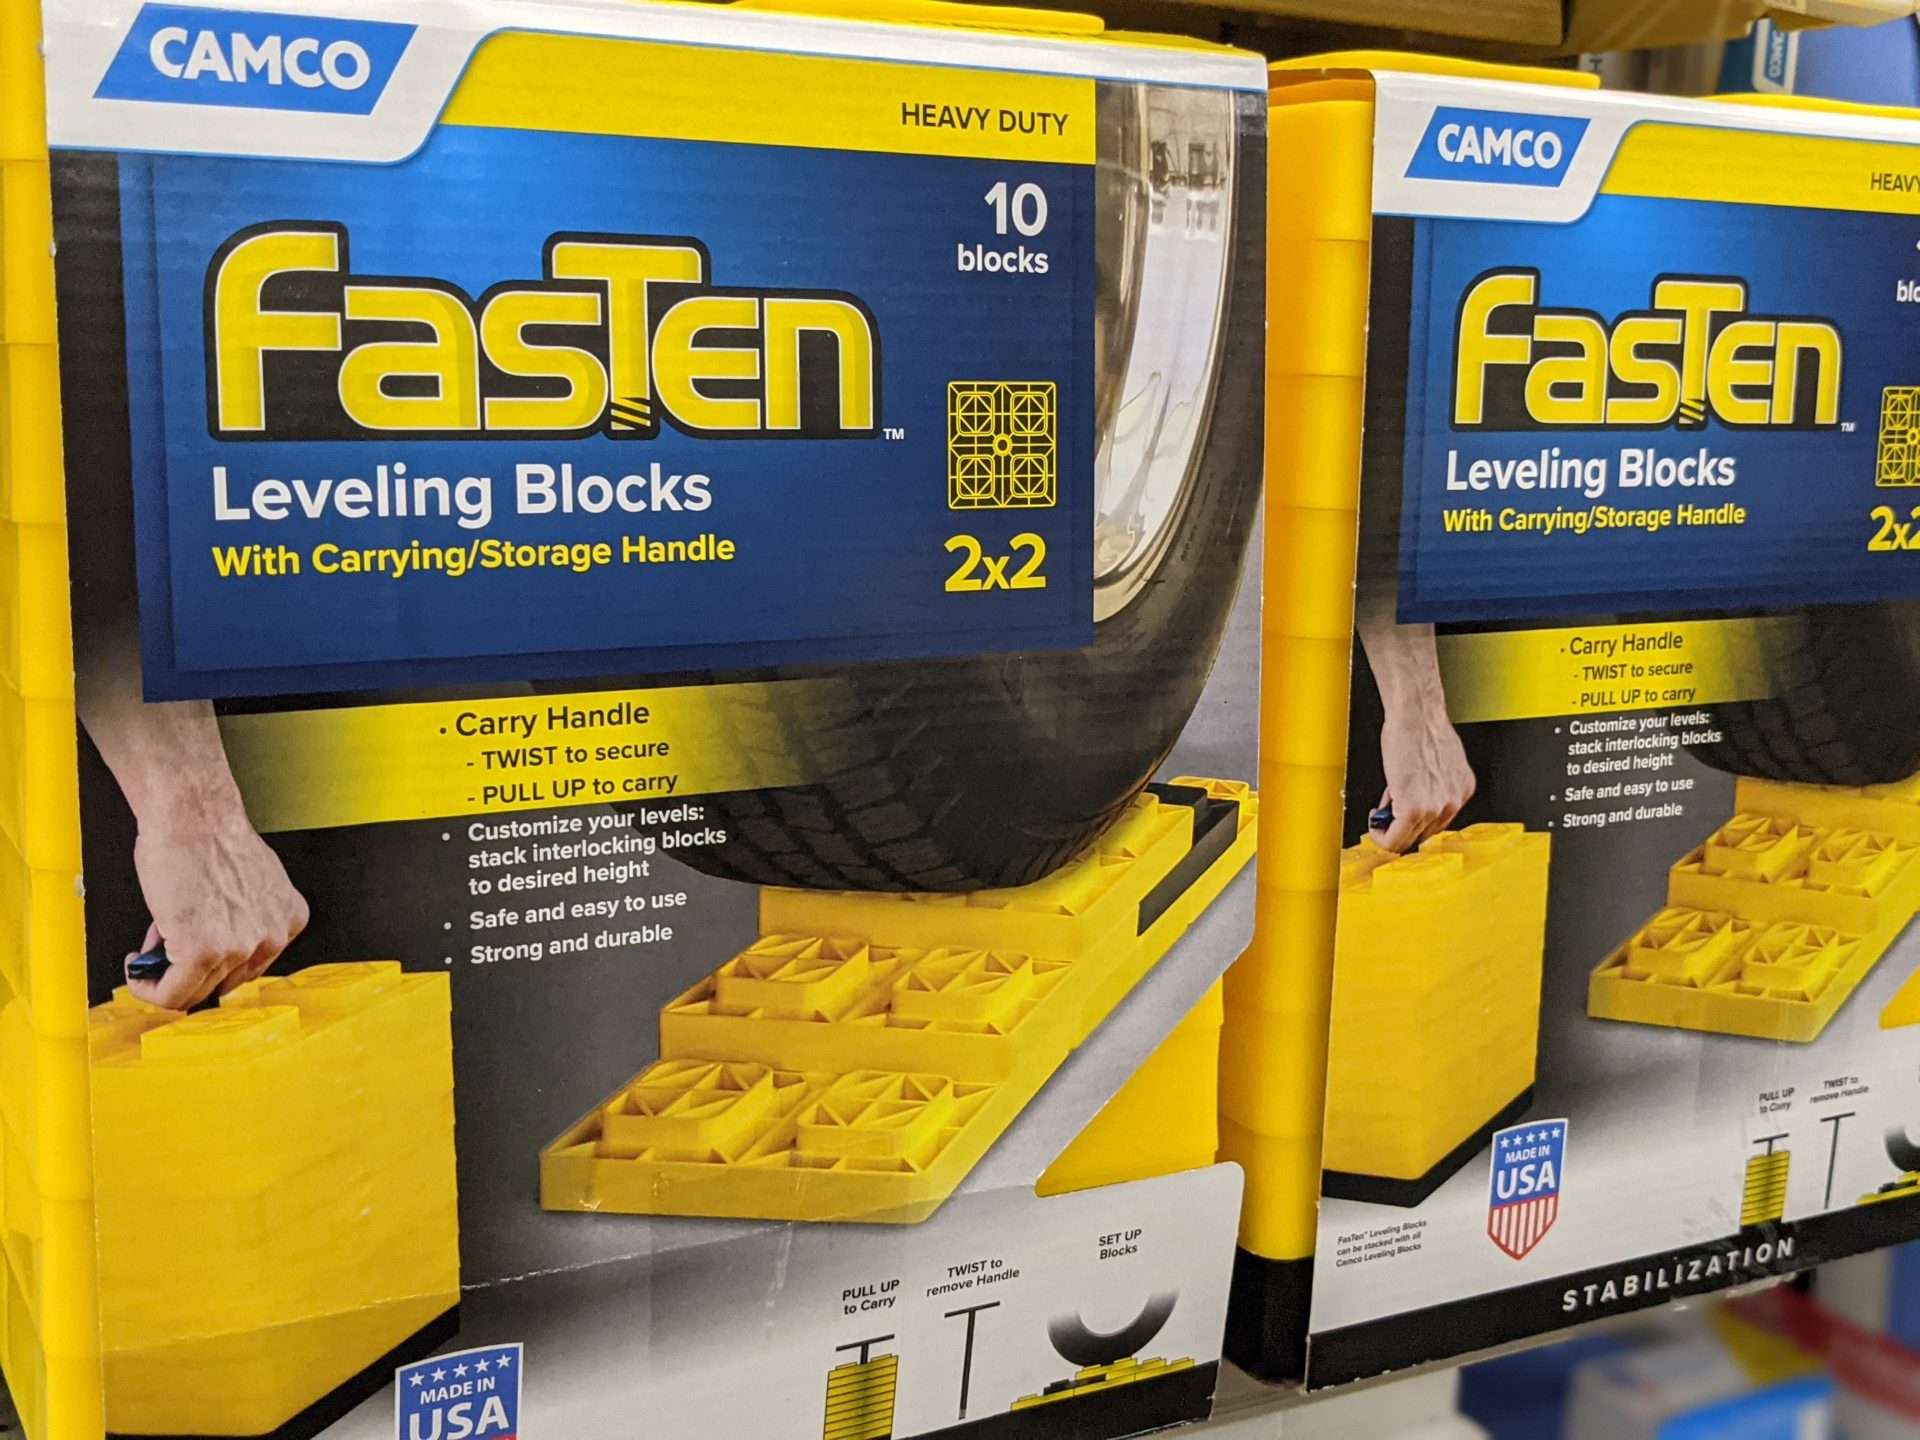 Camco FasTen leveling blocks packaging 